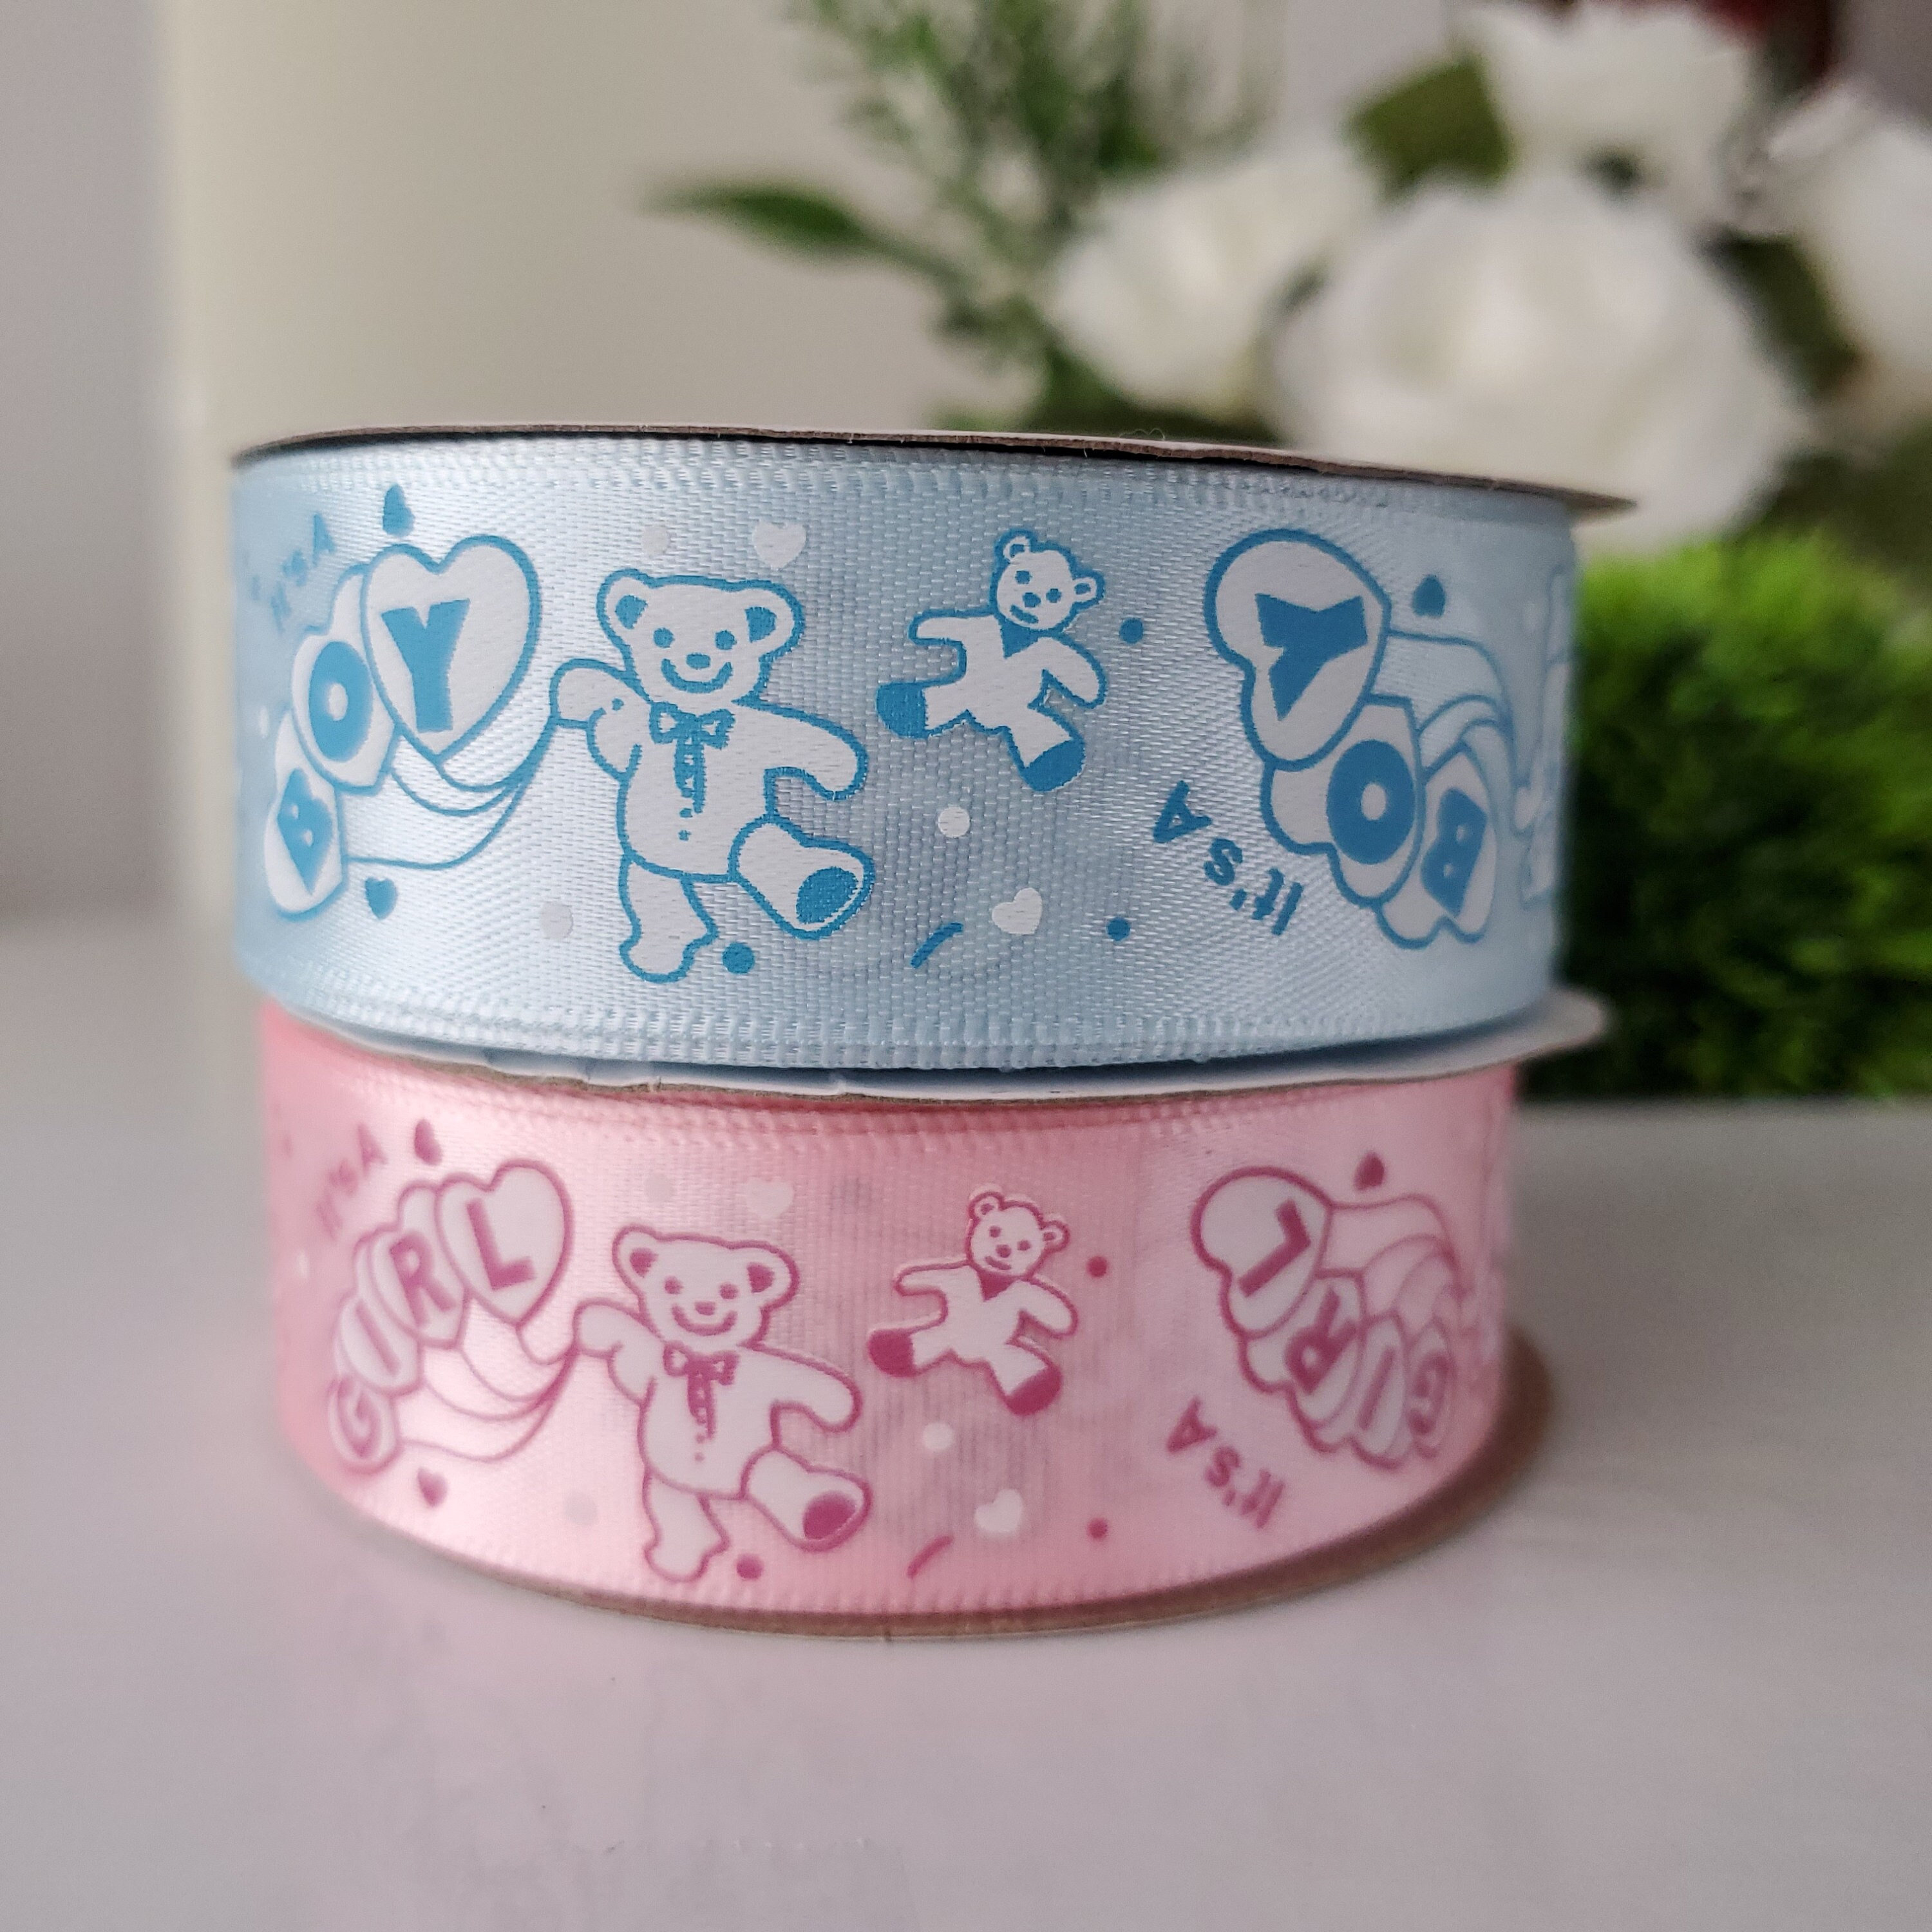 8 Roll Baby Elephant Grosgrain Ribbon 7/8 Inch Baby Shower Craft Ribbon  It's a Boy/Girl Foot Print Ribbon for Gift Wrapping Baby Shower Gender  Reveal